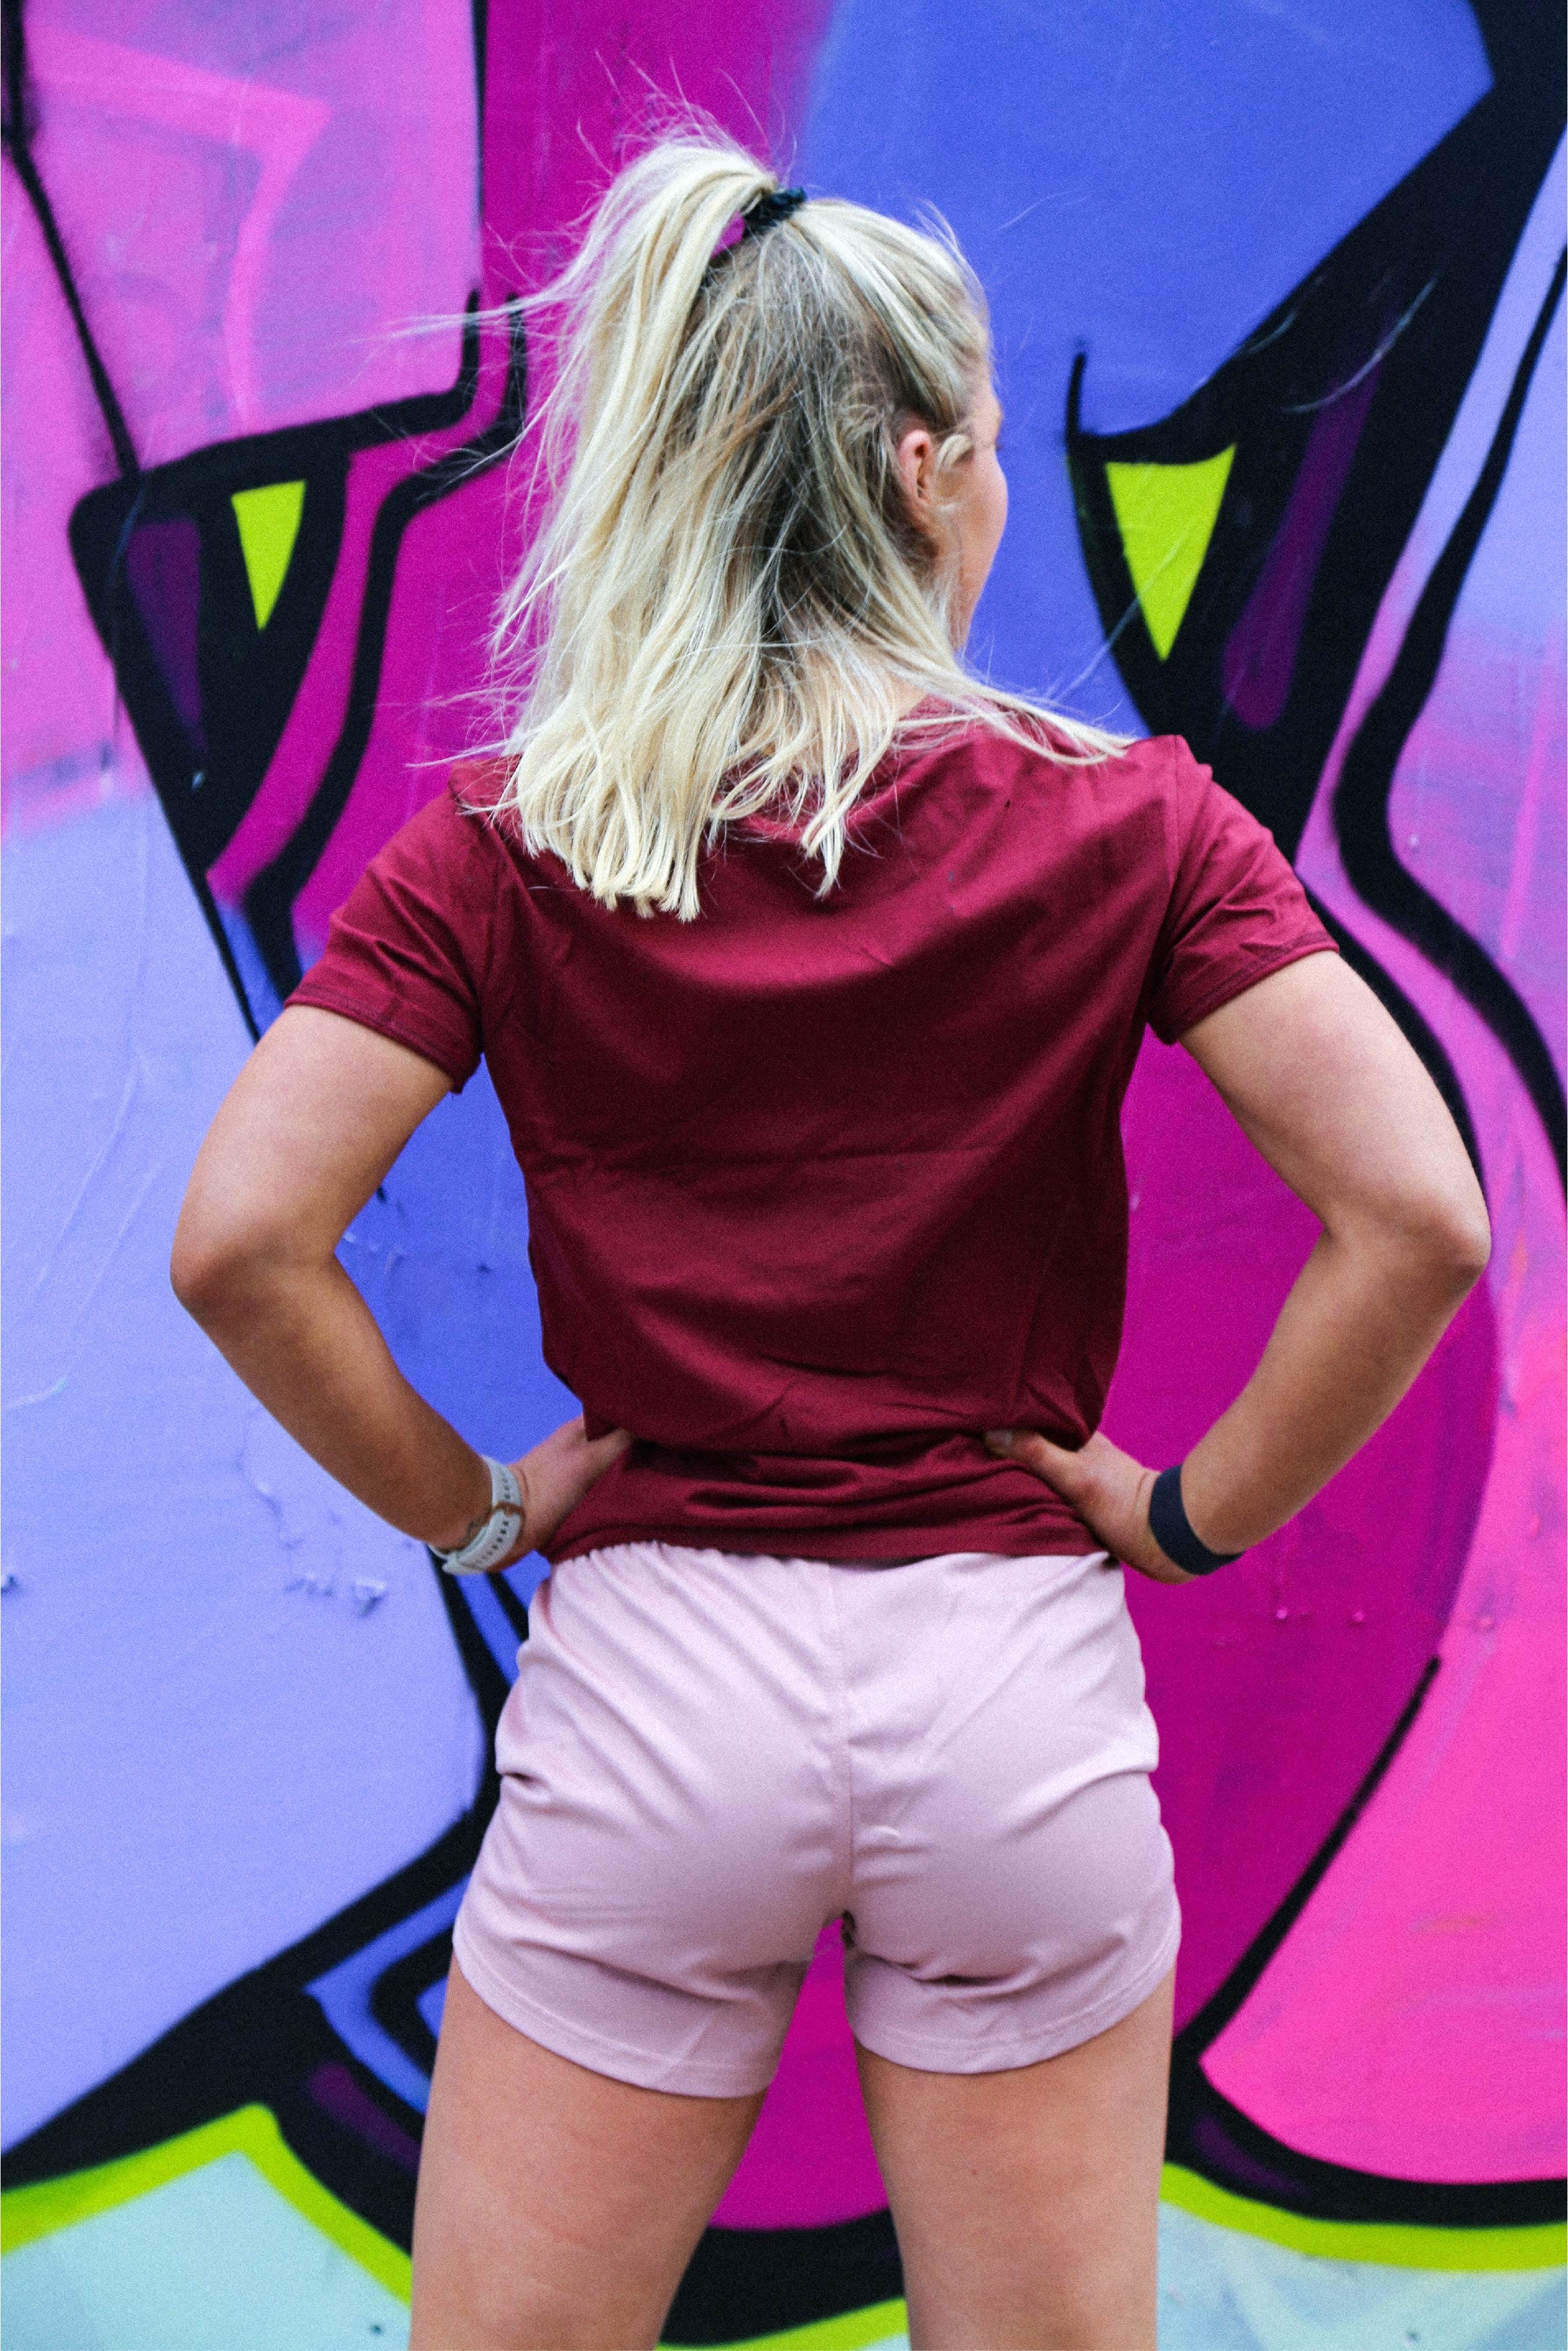 The Stadium Rugby Short 2.0 in Femme